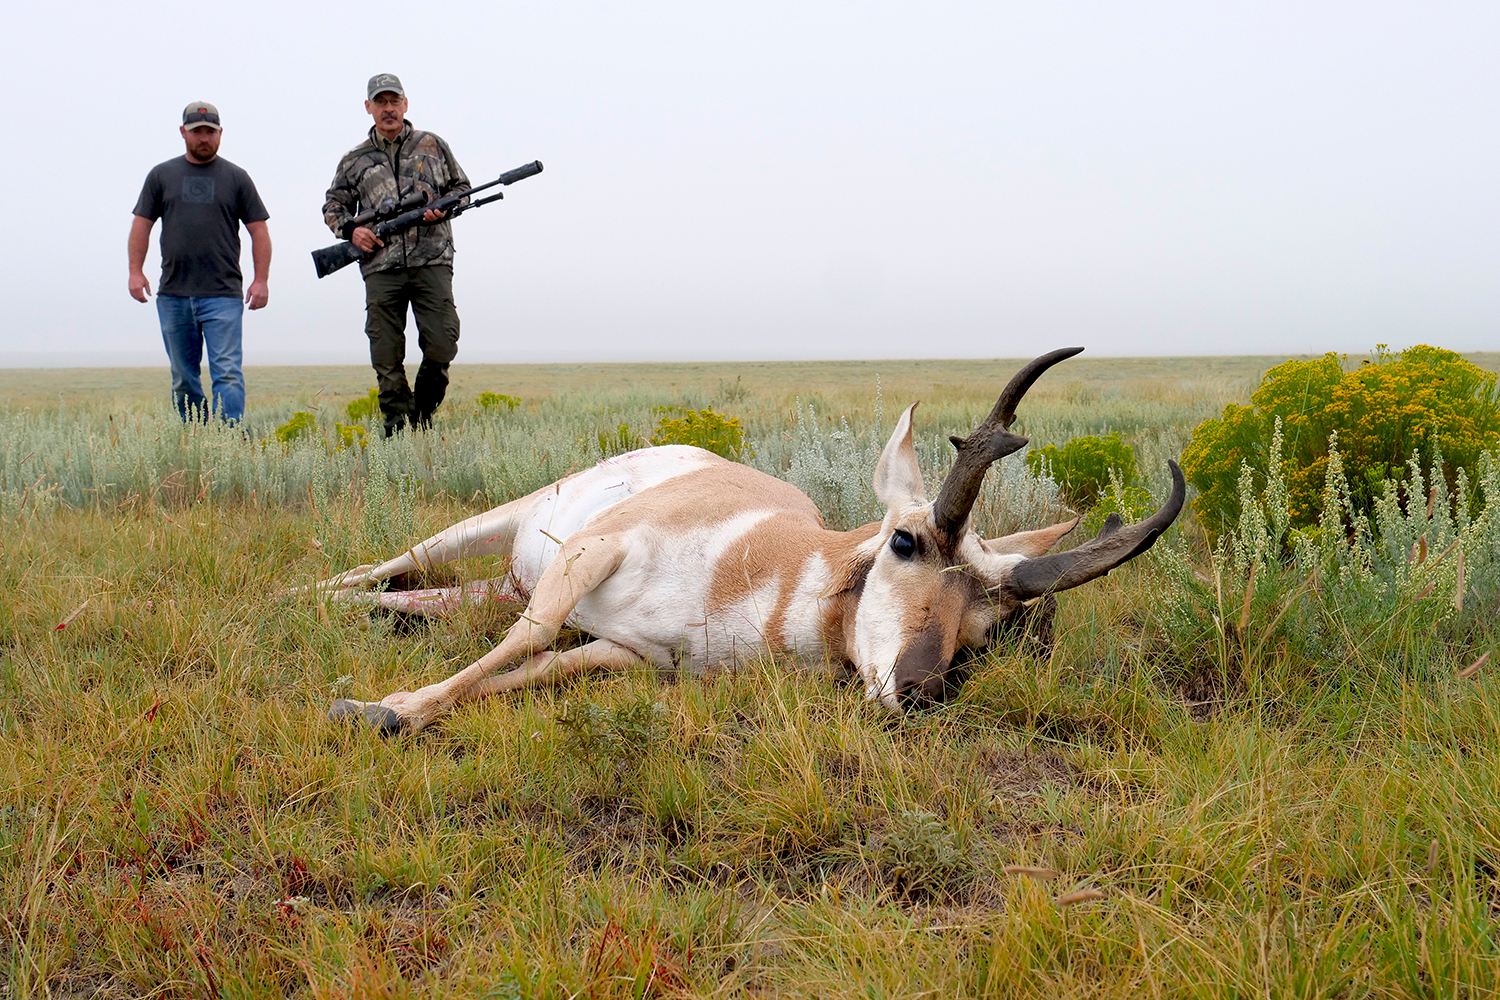 Two hunters, one holding a rifle, walk up on a downed pronghorn antelope in an open field.